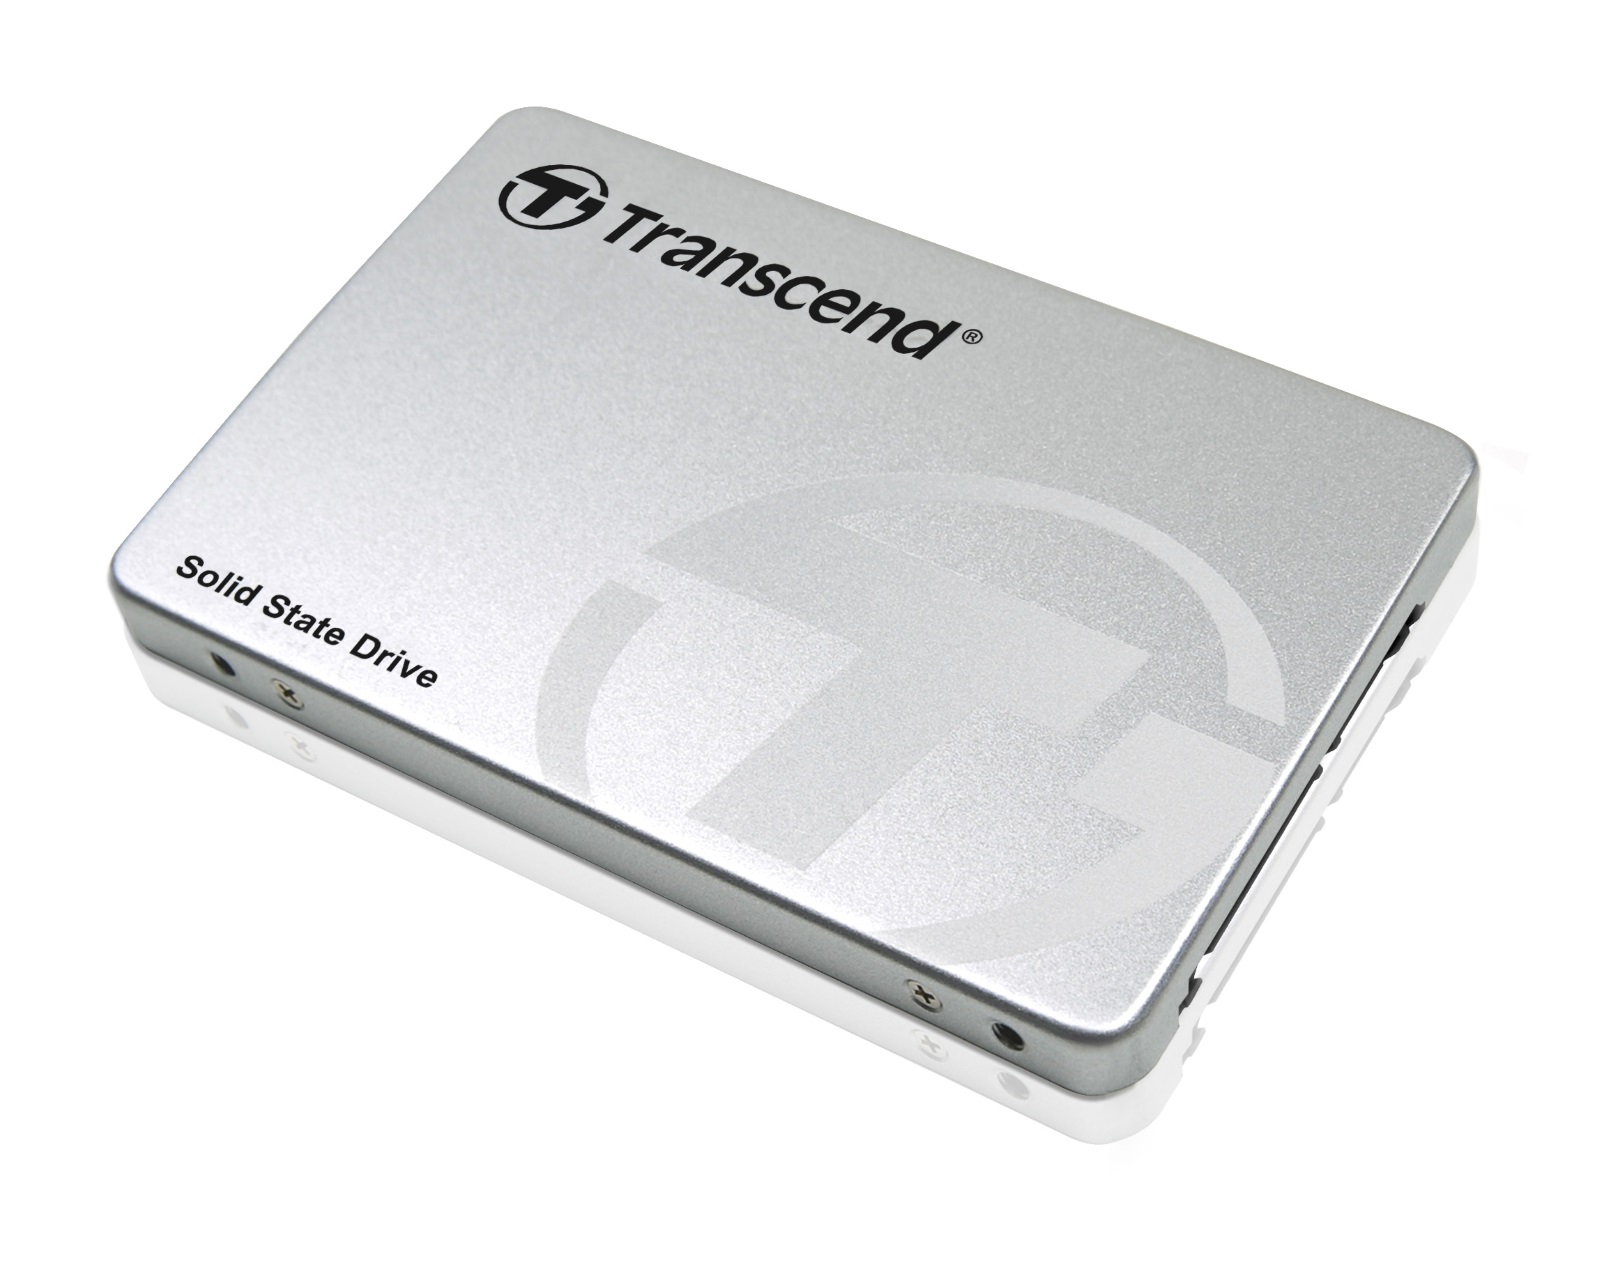 240GB Transcend SATA 6Gbps 2.5-inch SSD Solid State Disk SSD220S